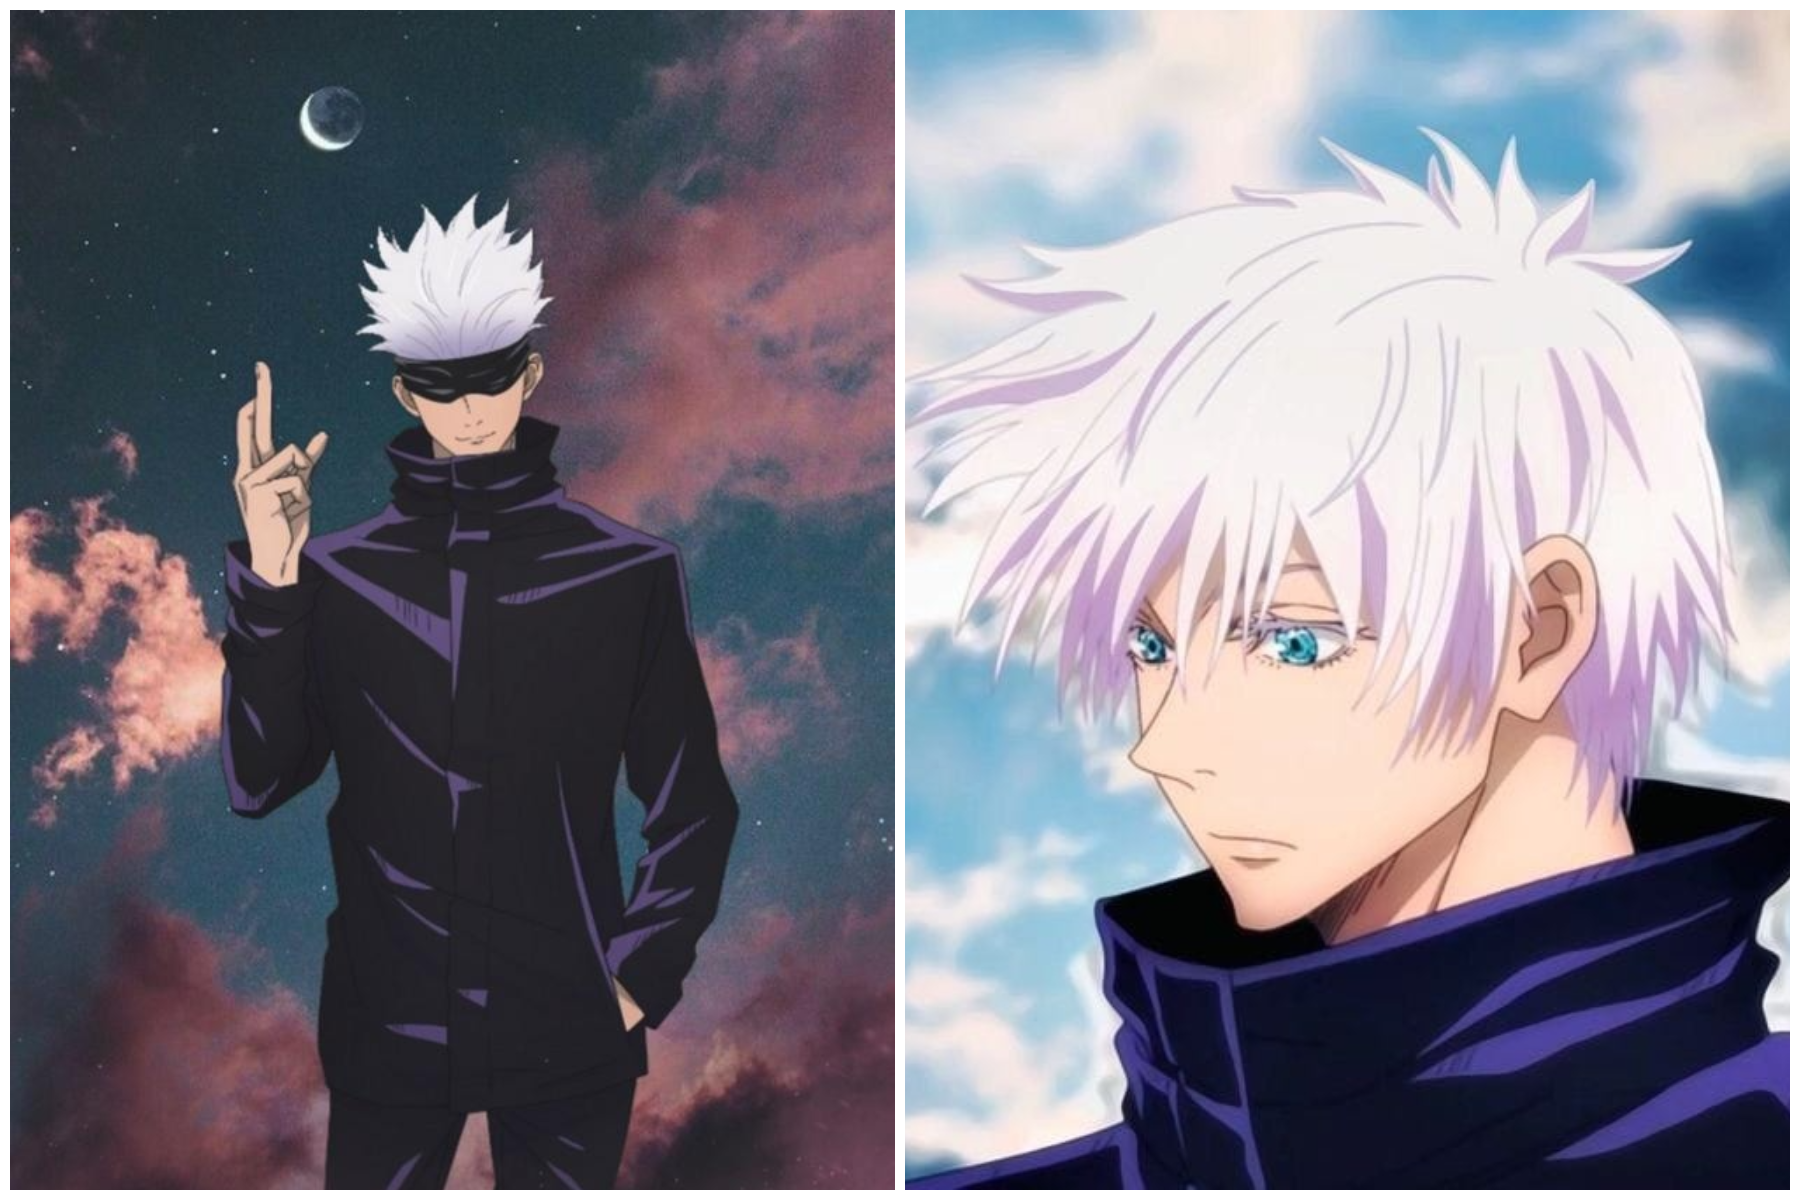 20 of the most iconic white-haired anime characters of all time